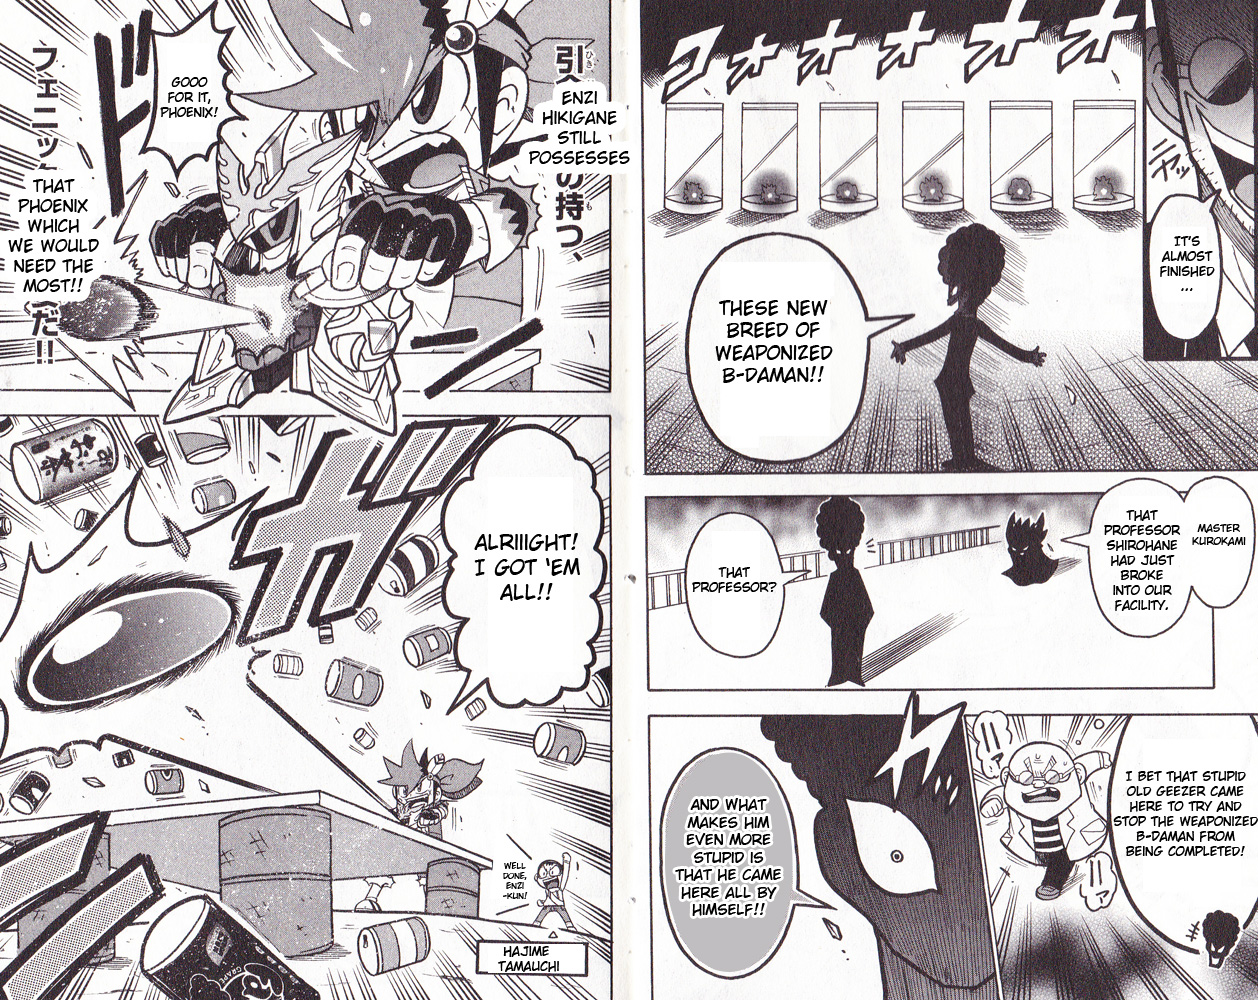 Cross Fight B-Daman: Legendary Phoenix Vol.1 Chapter 6: Unraveling The Power: Echarge System - Picture 2